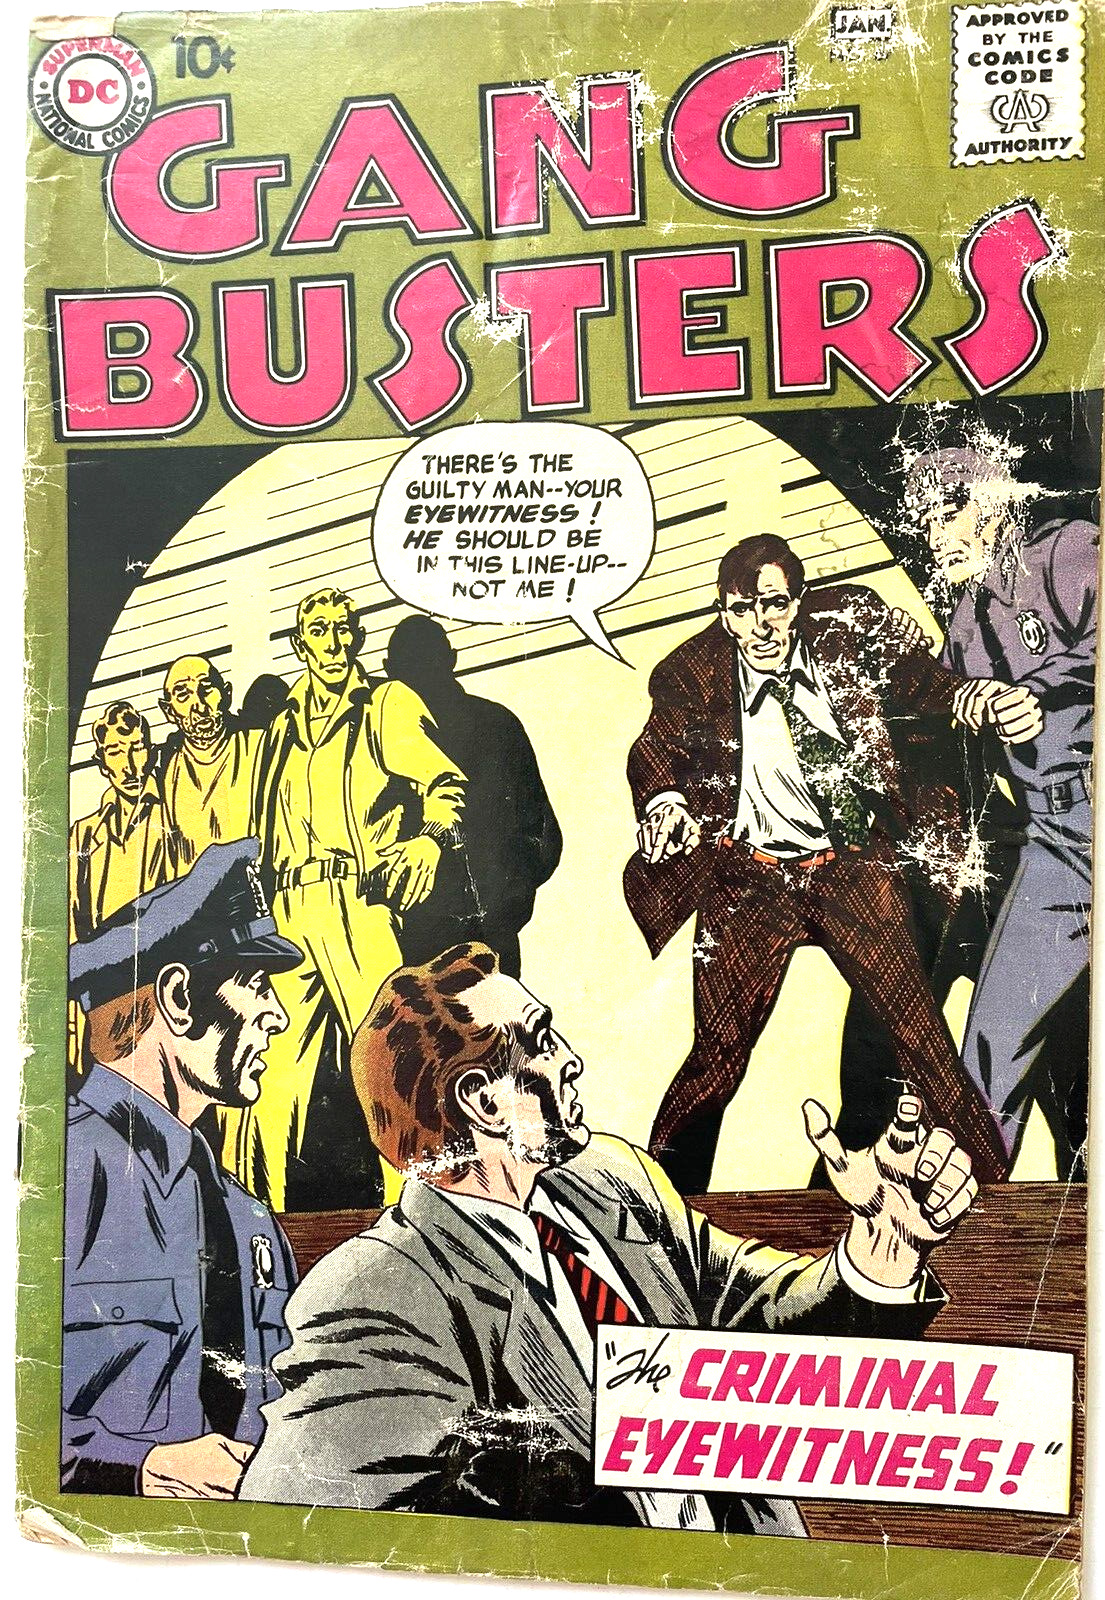 Gang Busters #67 1959-DC Comics Last Issue - Crime Stories - Silver Age